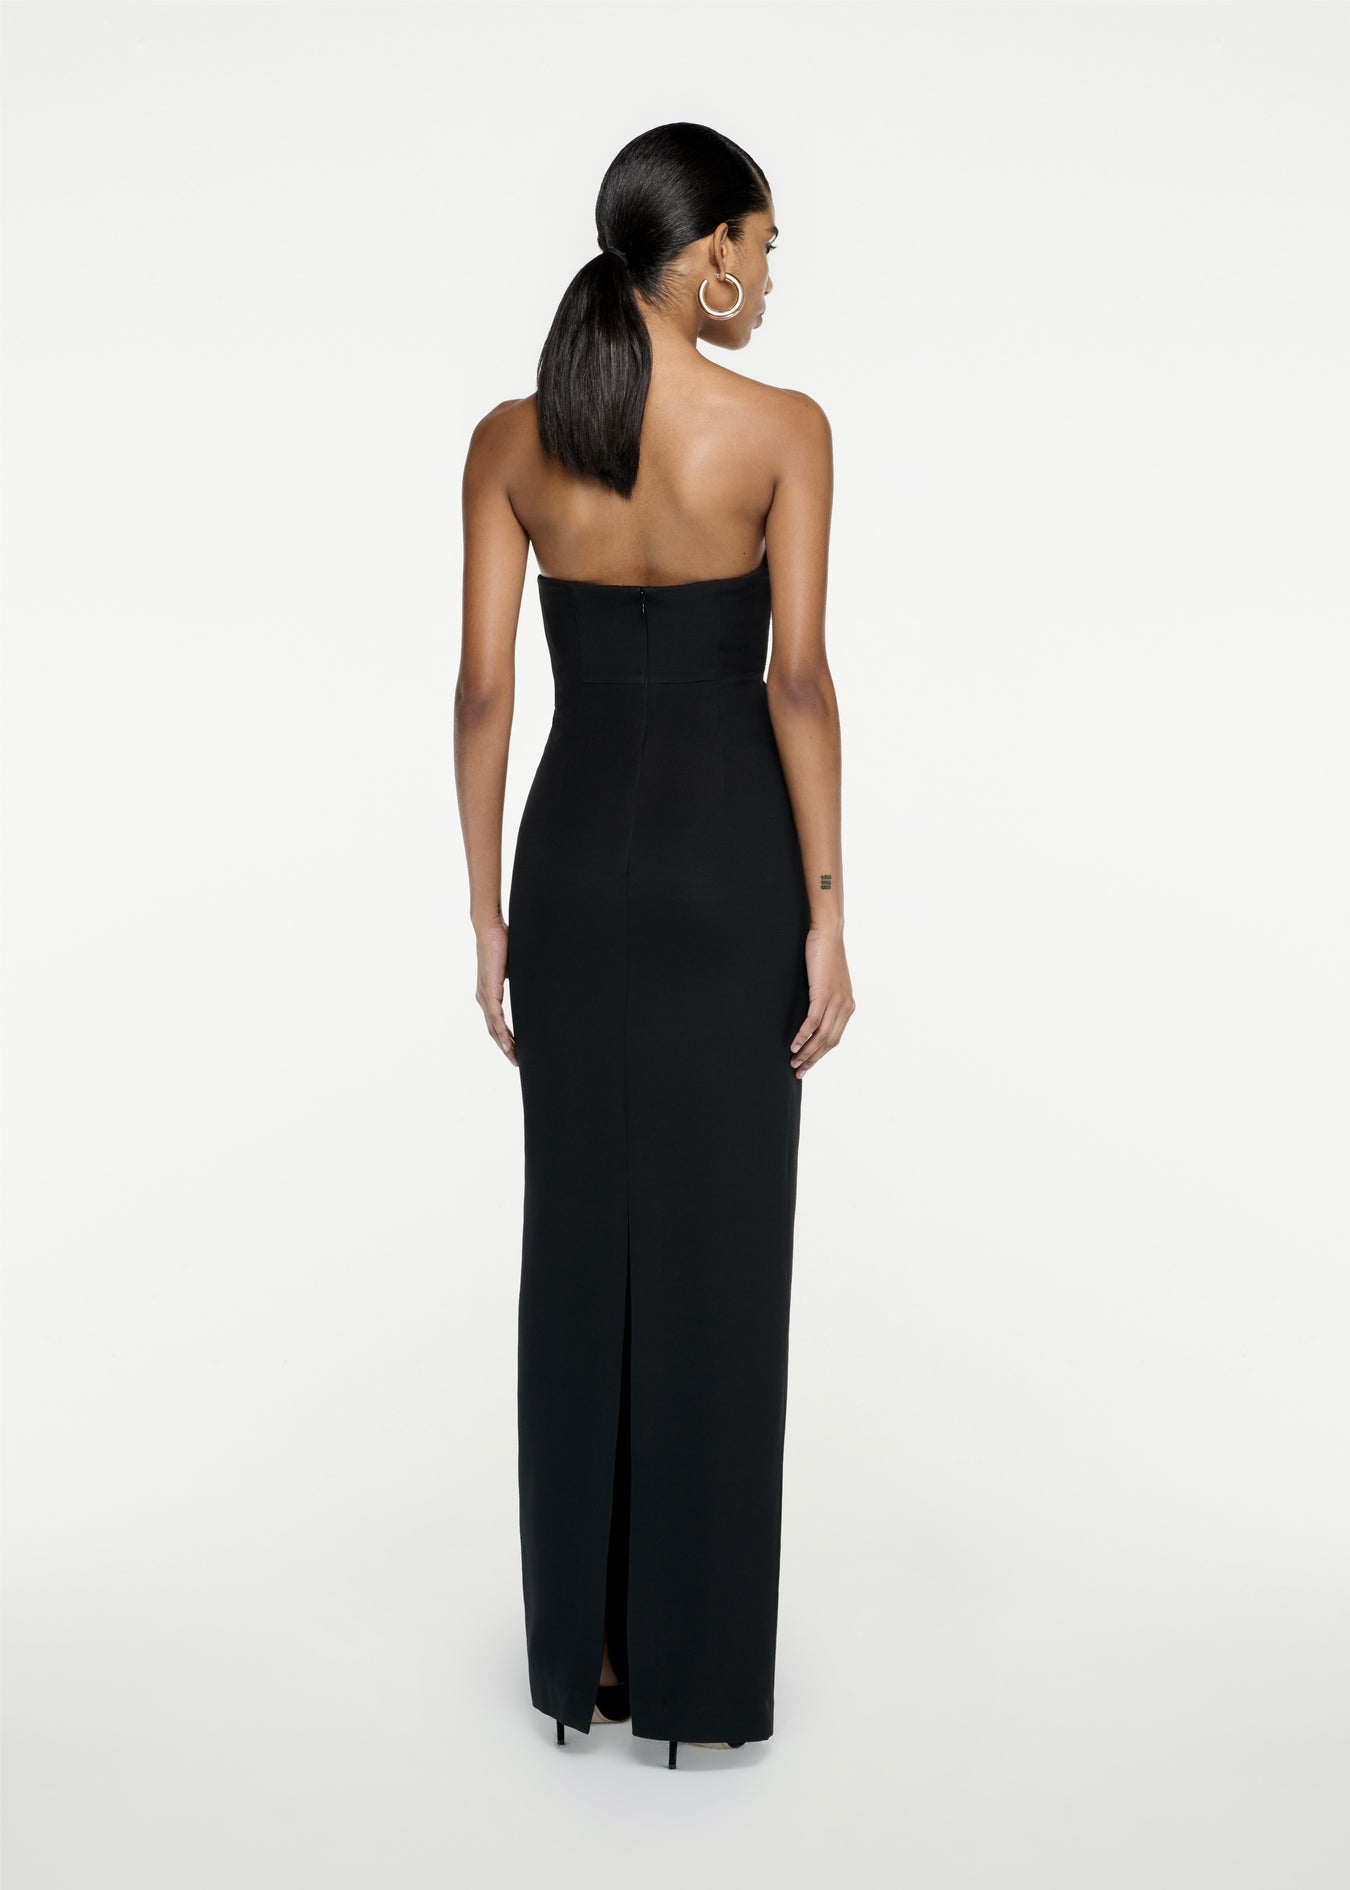 The back of a woman wearing the Strapless Silk Wool Diamante Maxi Dress in Black